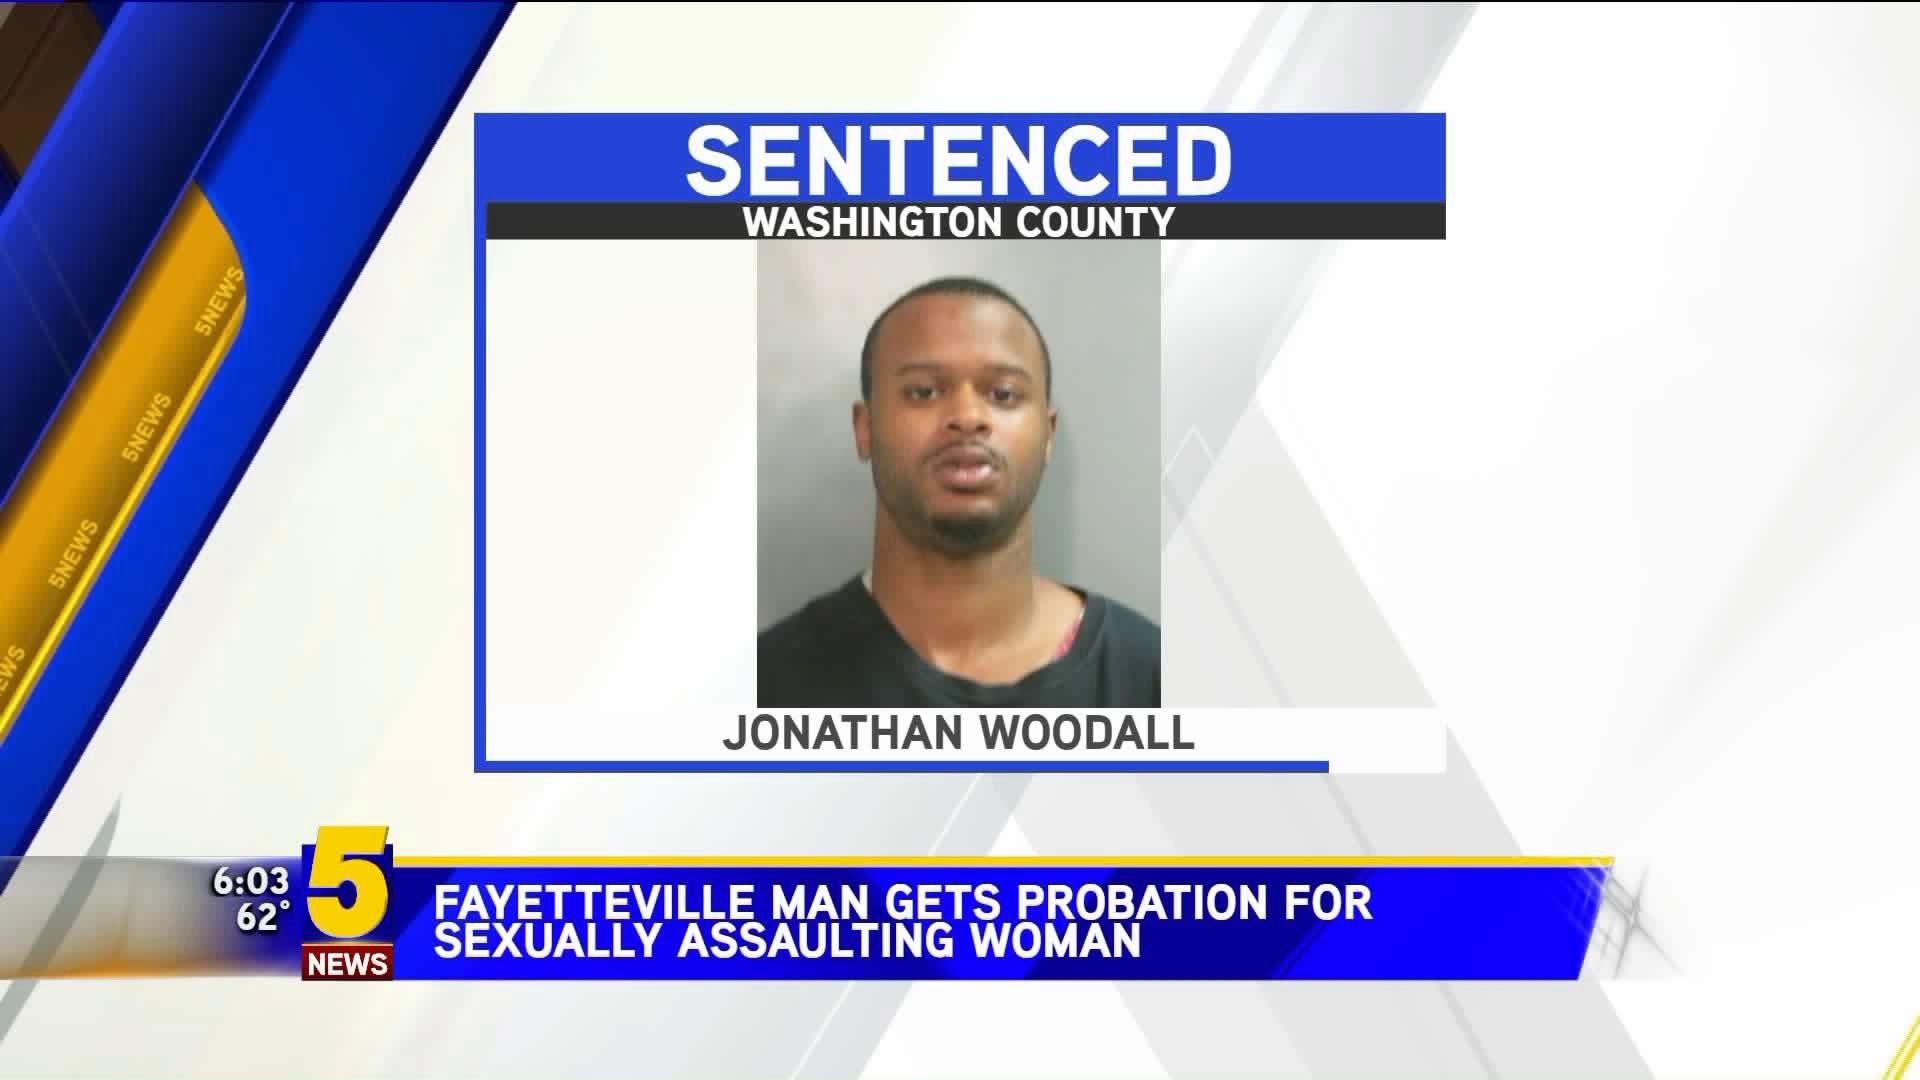 Fayetteville Man Gets Probation For Sexually Assaulting Woman